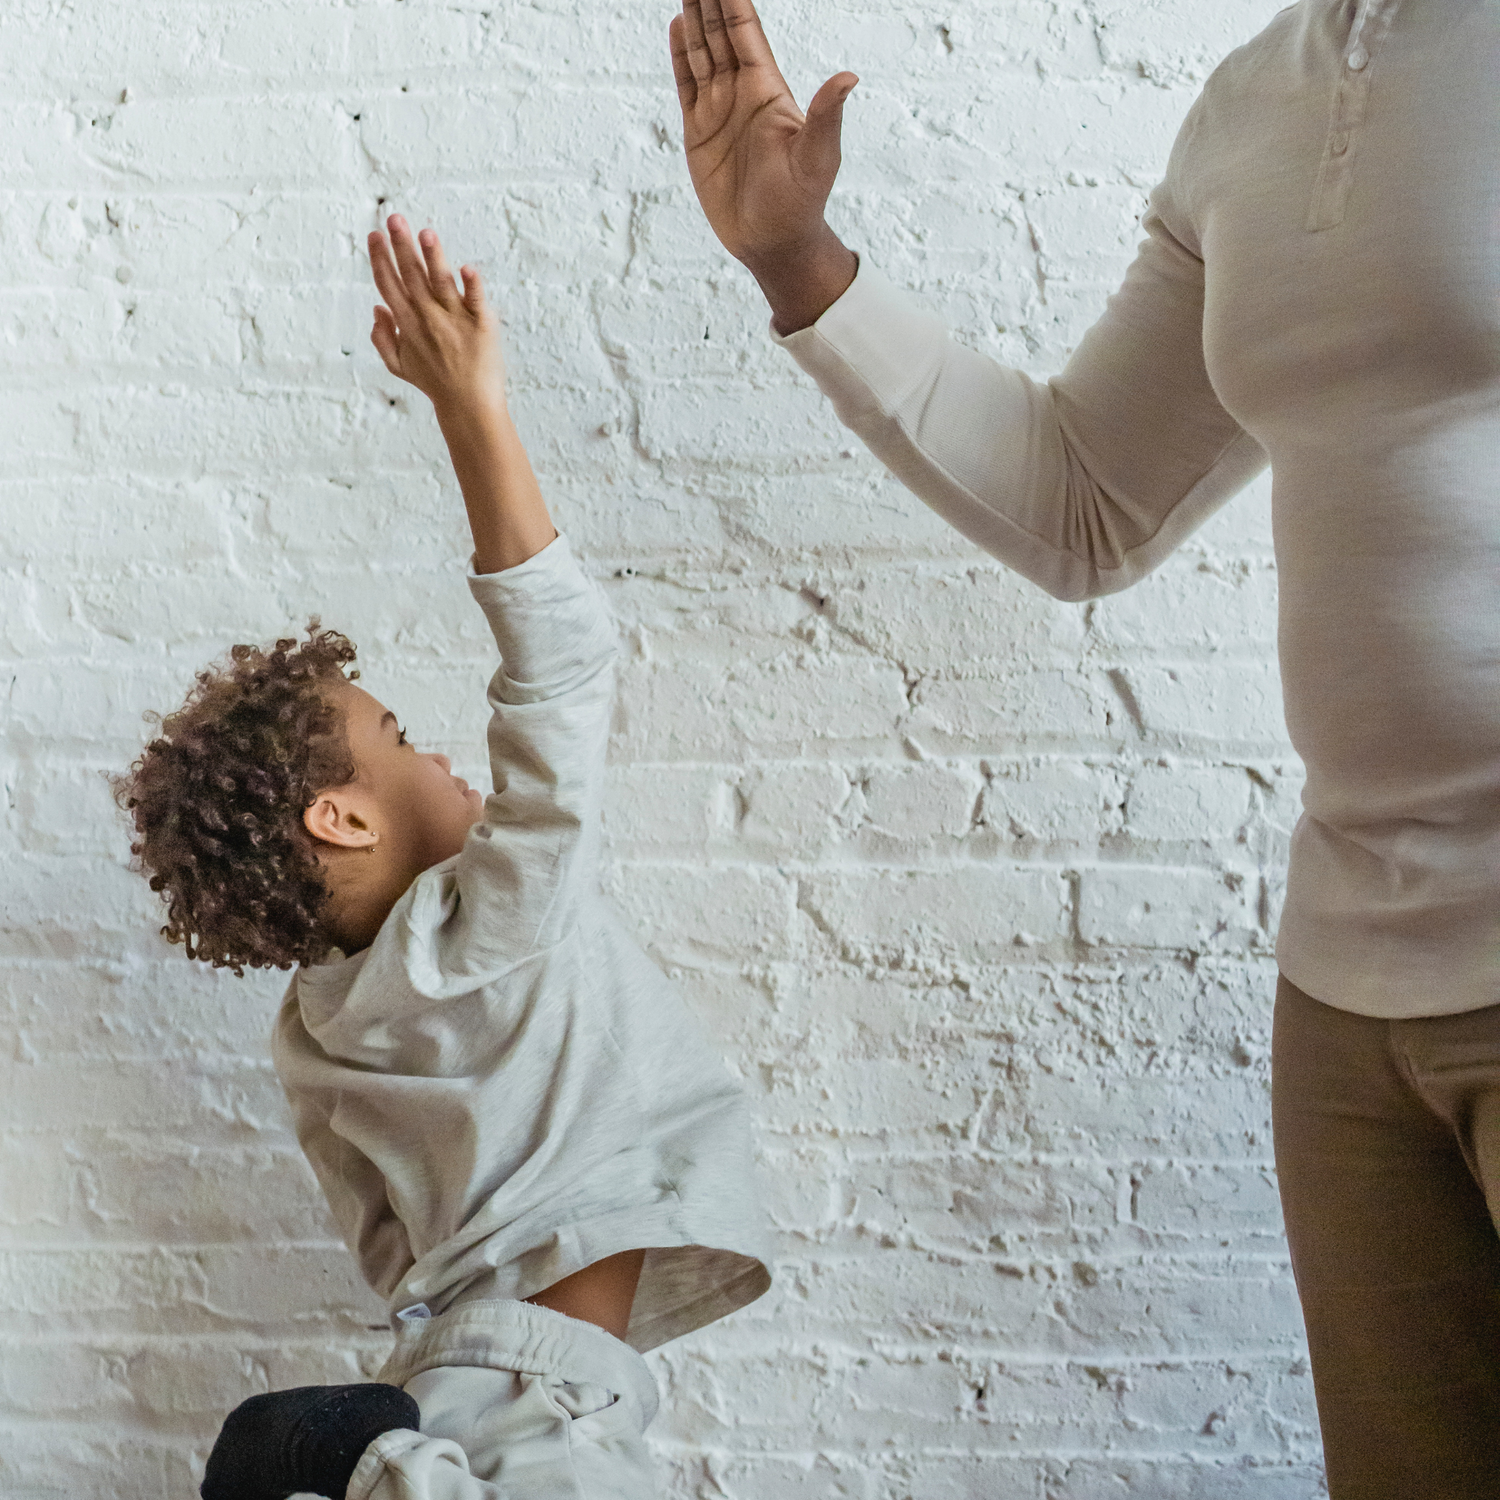 Alternatives To Saying 'No': Parenting Tips